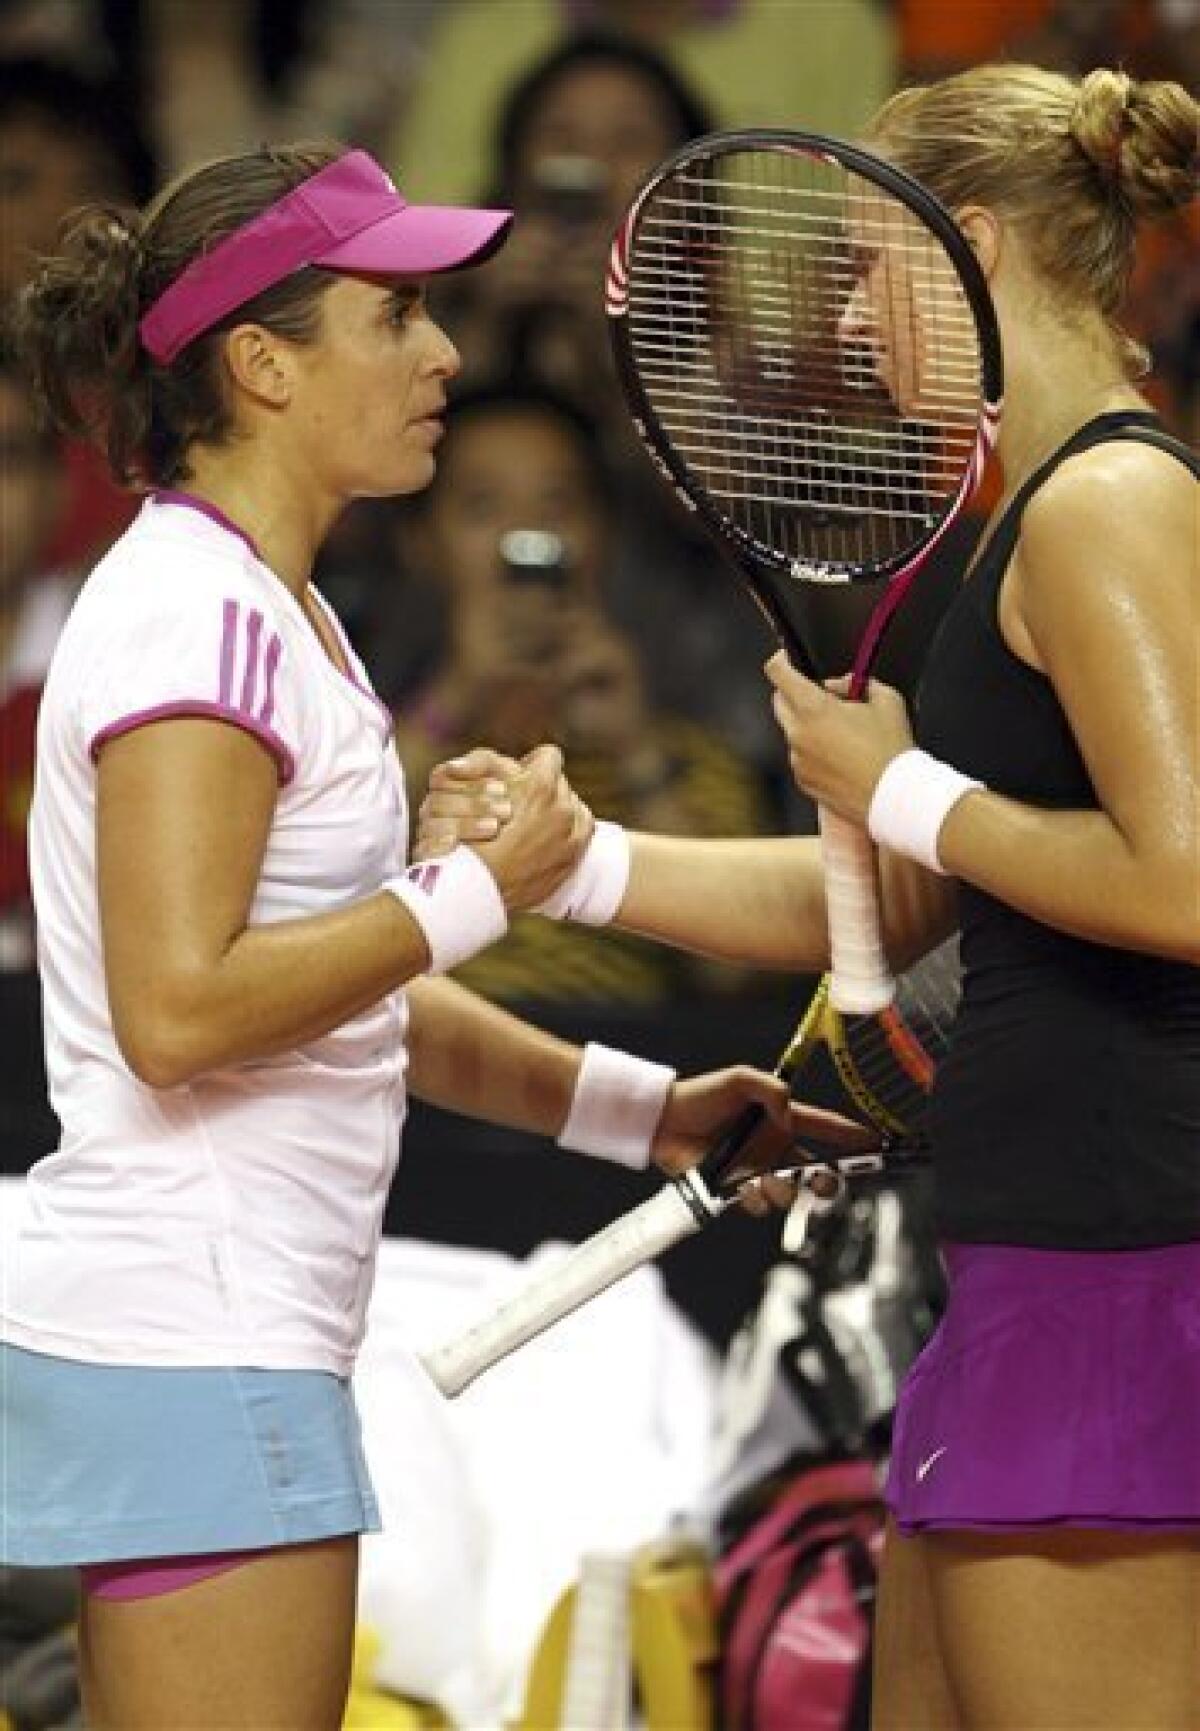 Anabel Medina Garrigues of Spain, left, shakes hands Sabine Lisicki of Germany after their semifinal tennis match at the Bali Tournament of Champions tennis match in Nusa Dua, Bali, Indonesia, Saturday, Nov. 5, 2011. Medina Garrigues won the match as Lisicky retired with a back injury. (AP Photo/Firdia Lisnawati)